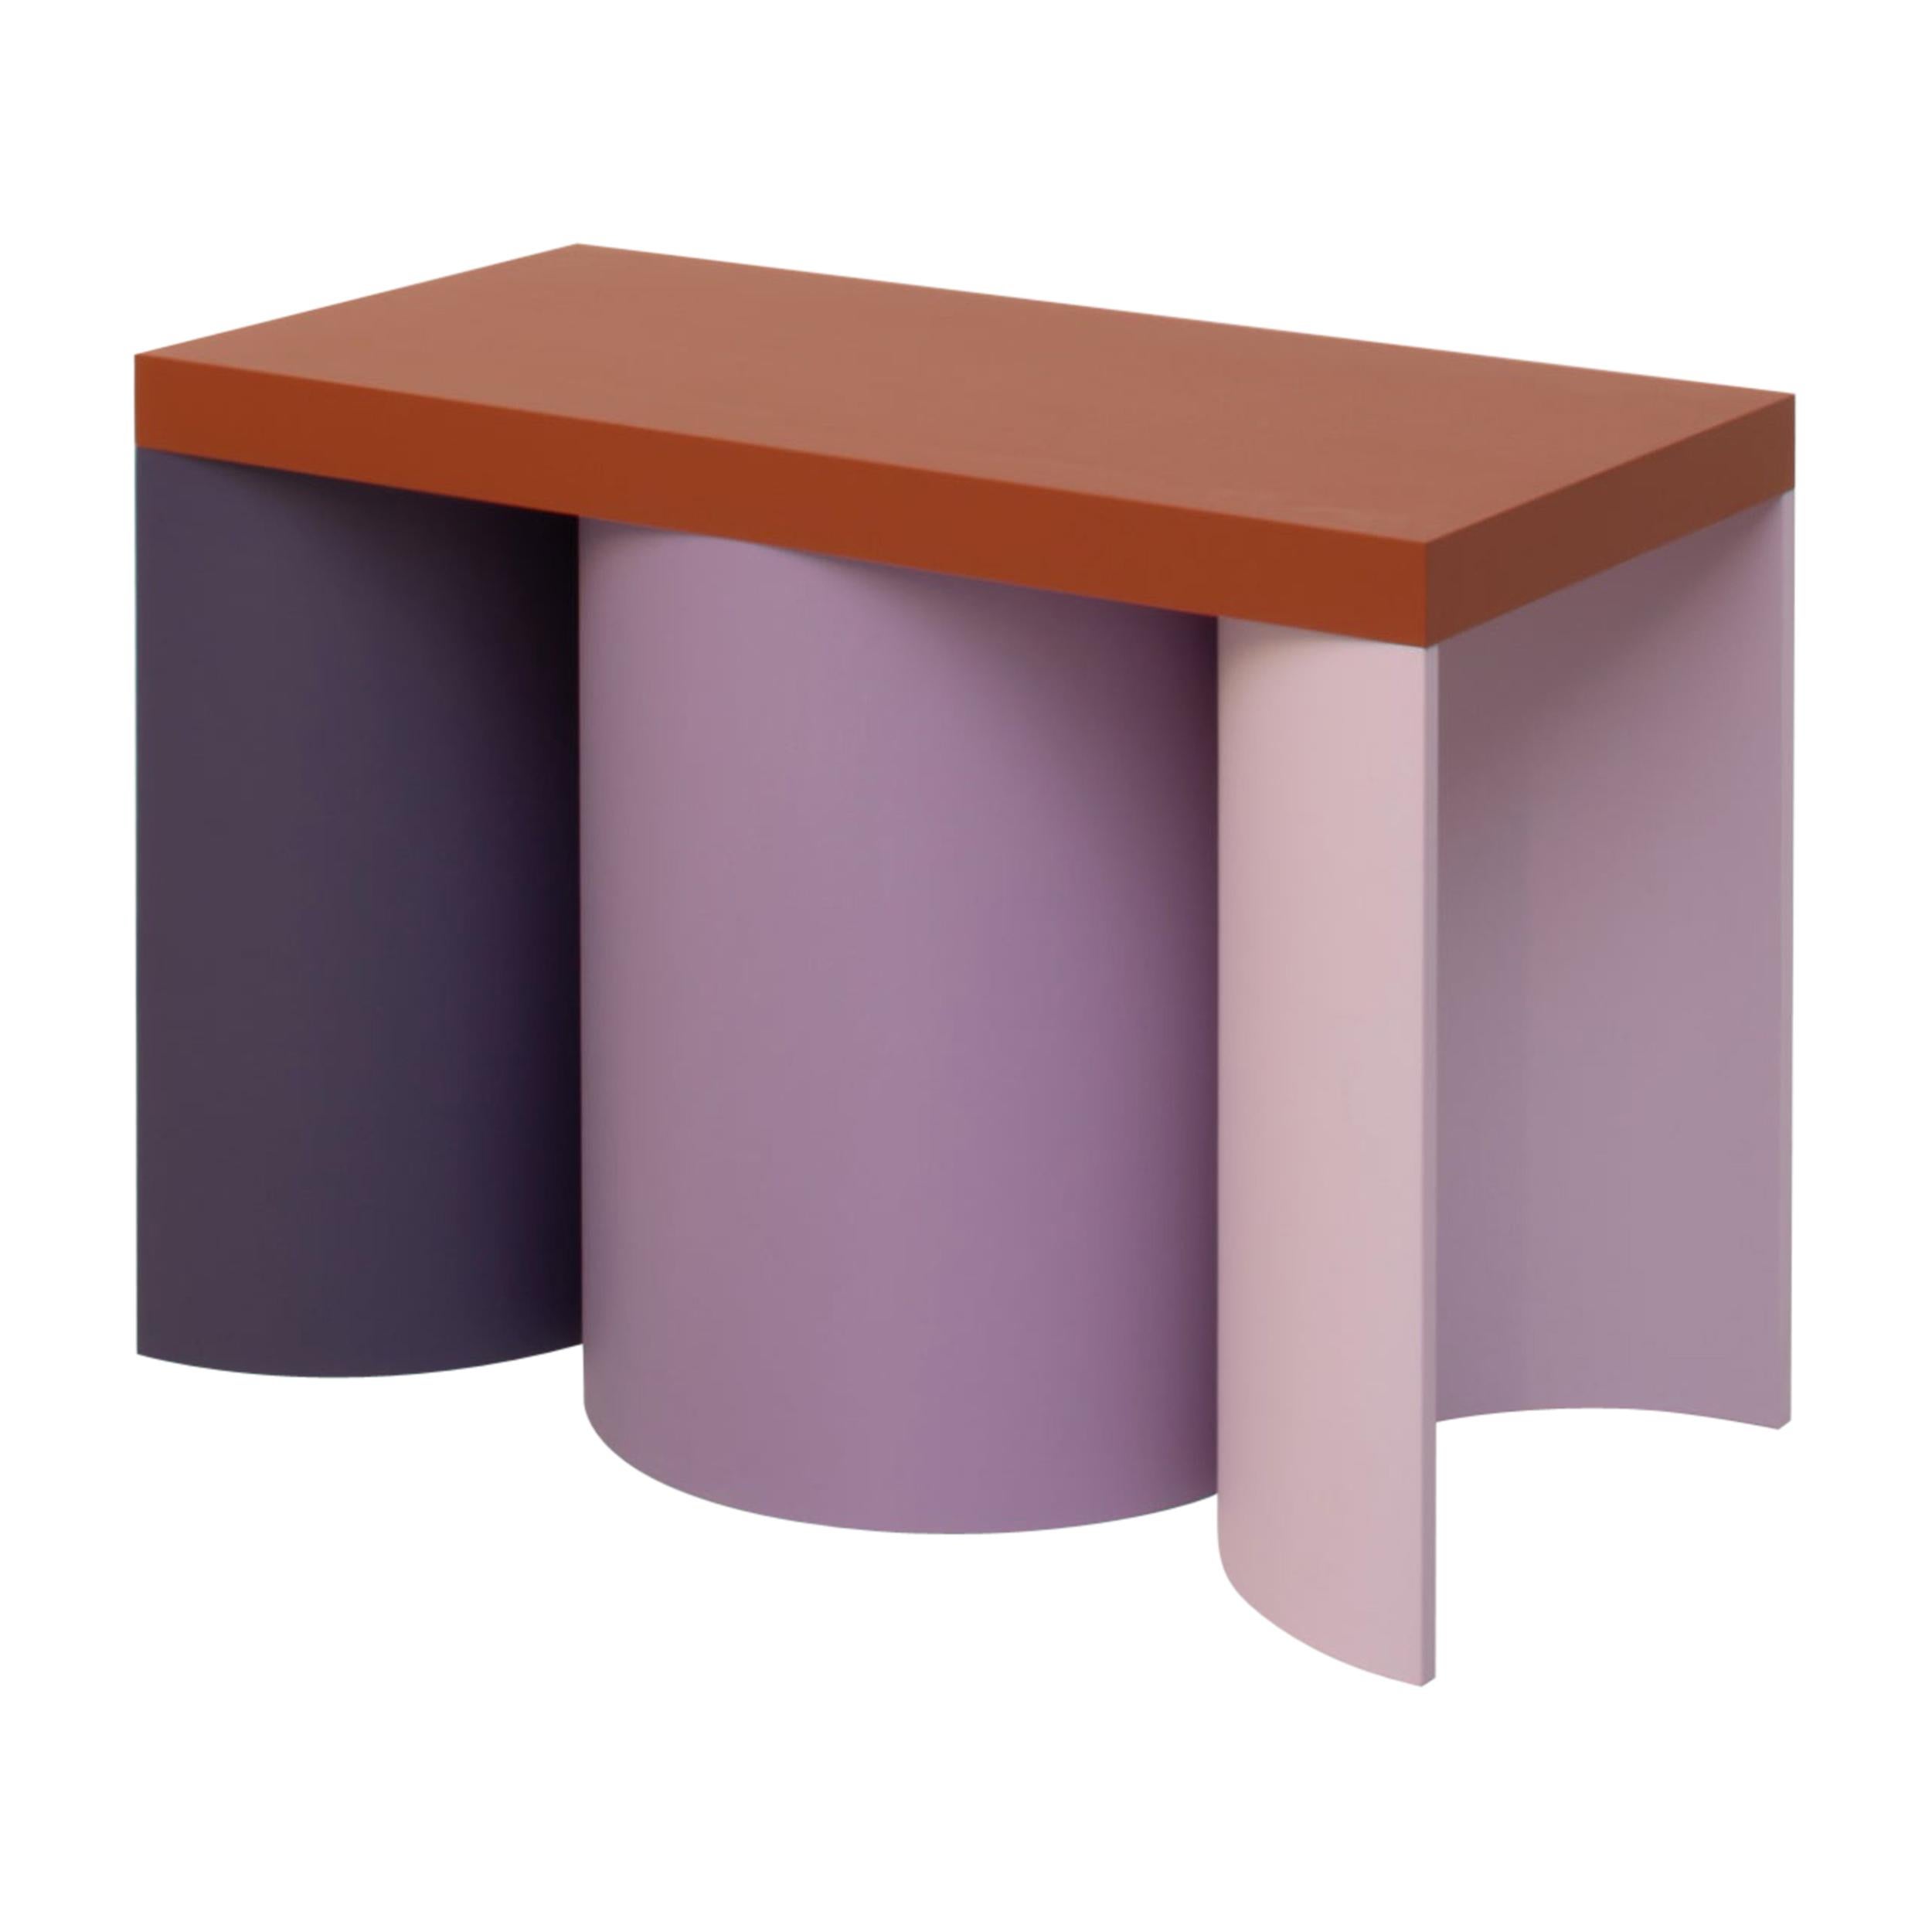 Stool Colorful Design Modern Contemporary Seating Rounded Shapes Form Stool 3